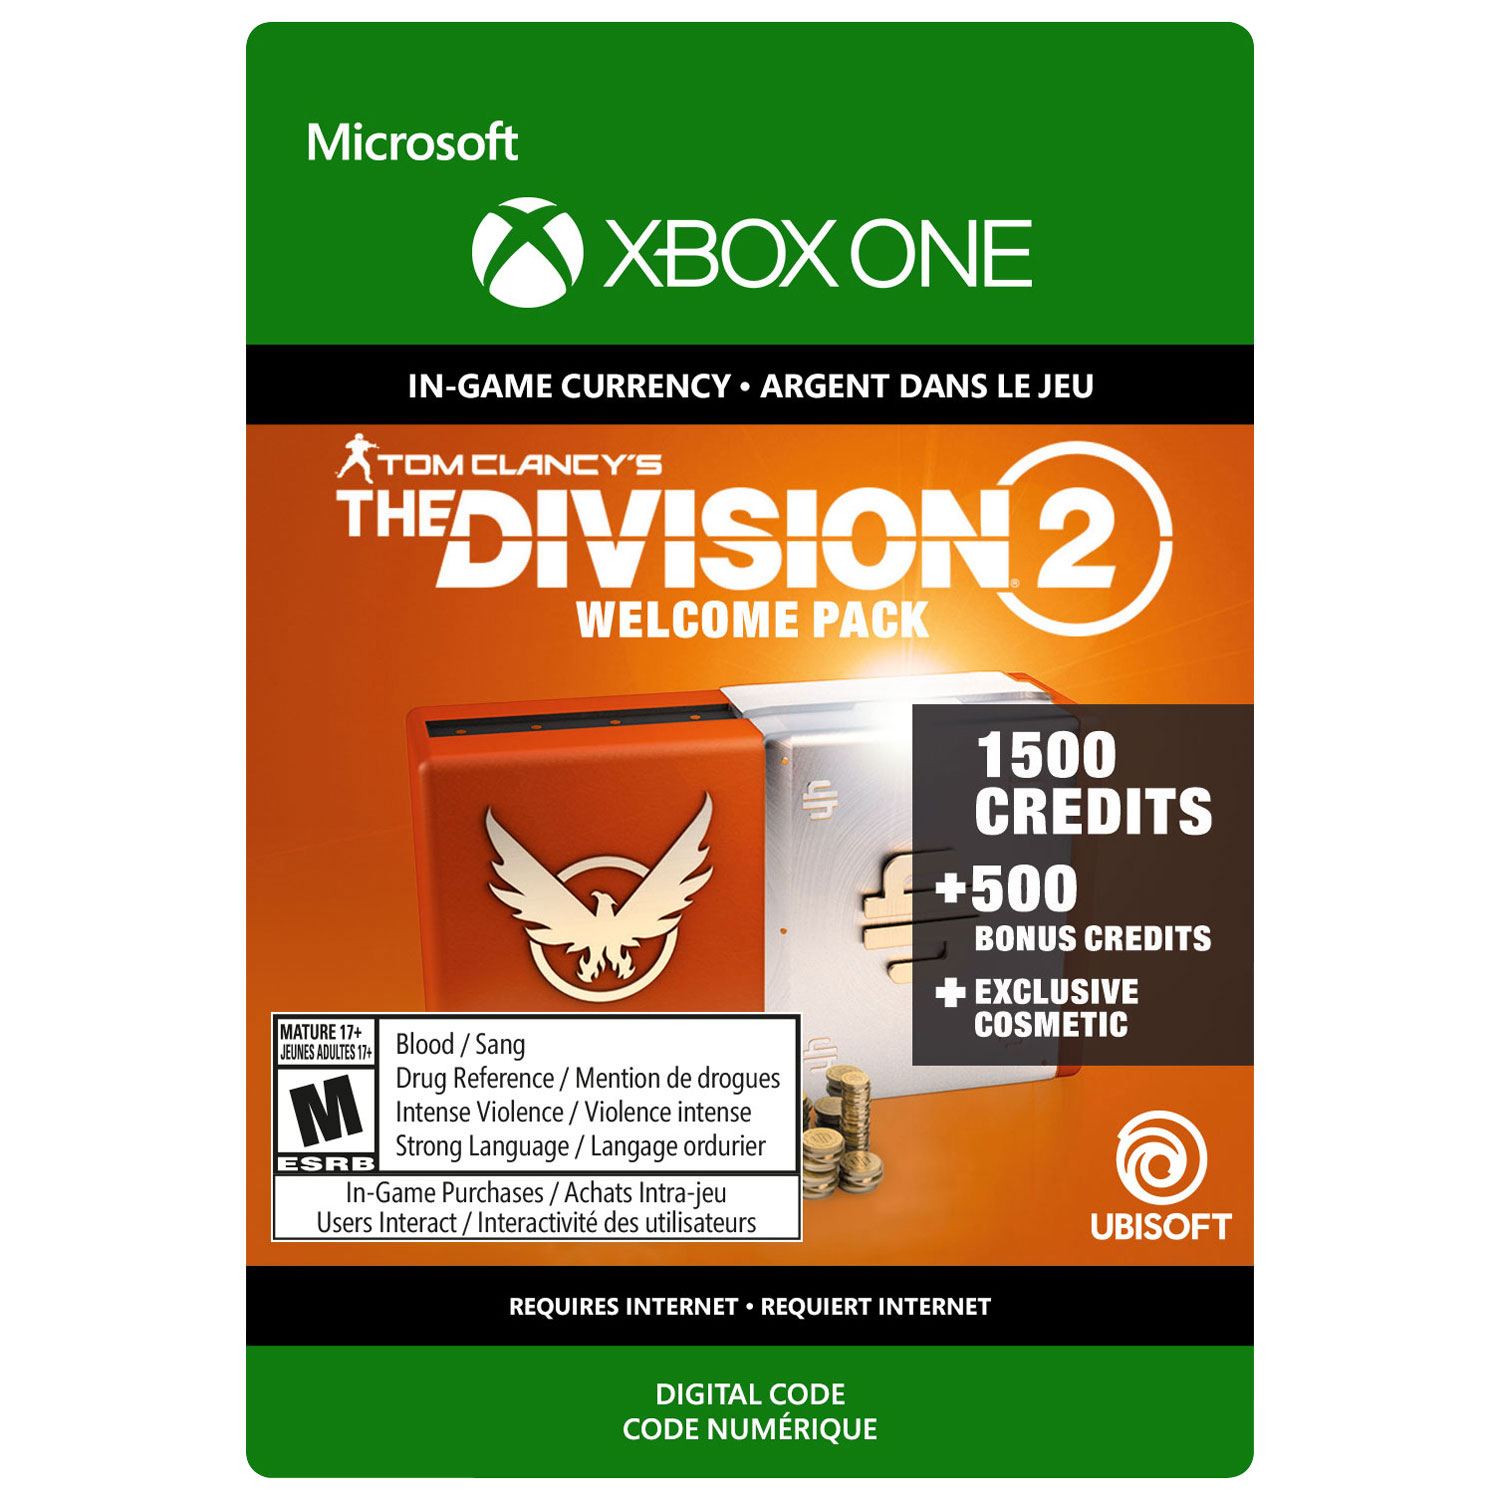 Tom Clancy's The Division 2: Welcome Pack (Xbox One) - Digital Download